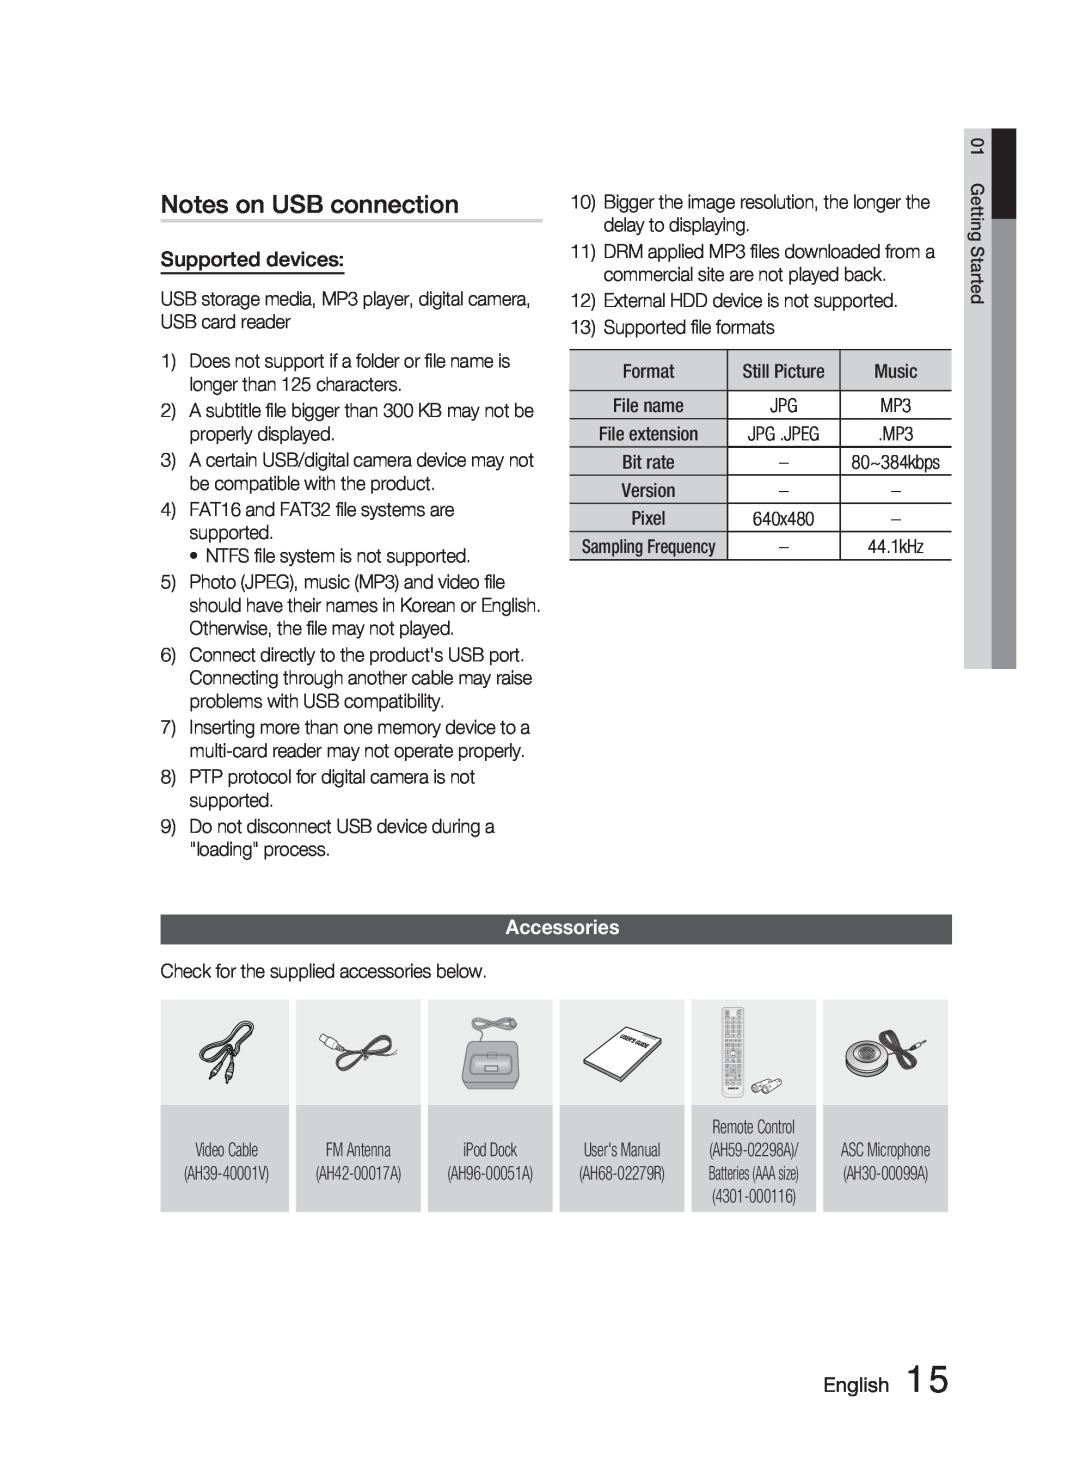 Samsung AH68-02279R user manual Notes on USB connection, Supported devices, Accessories, English 